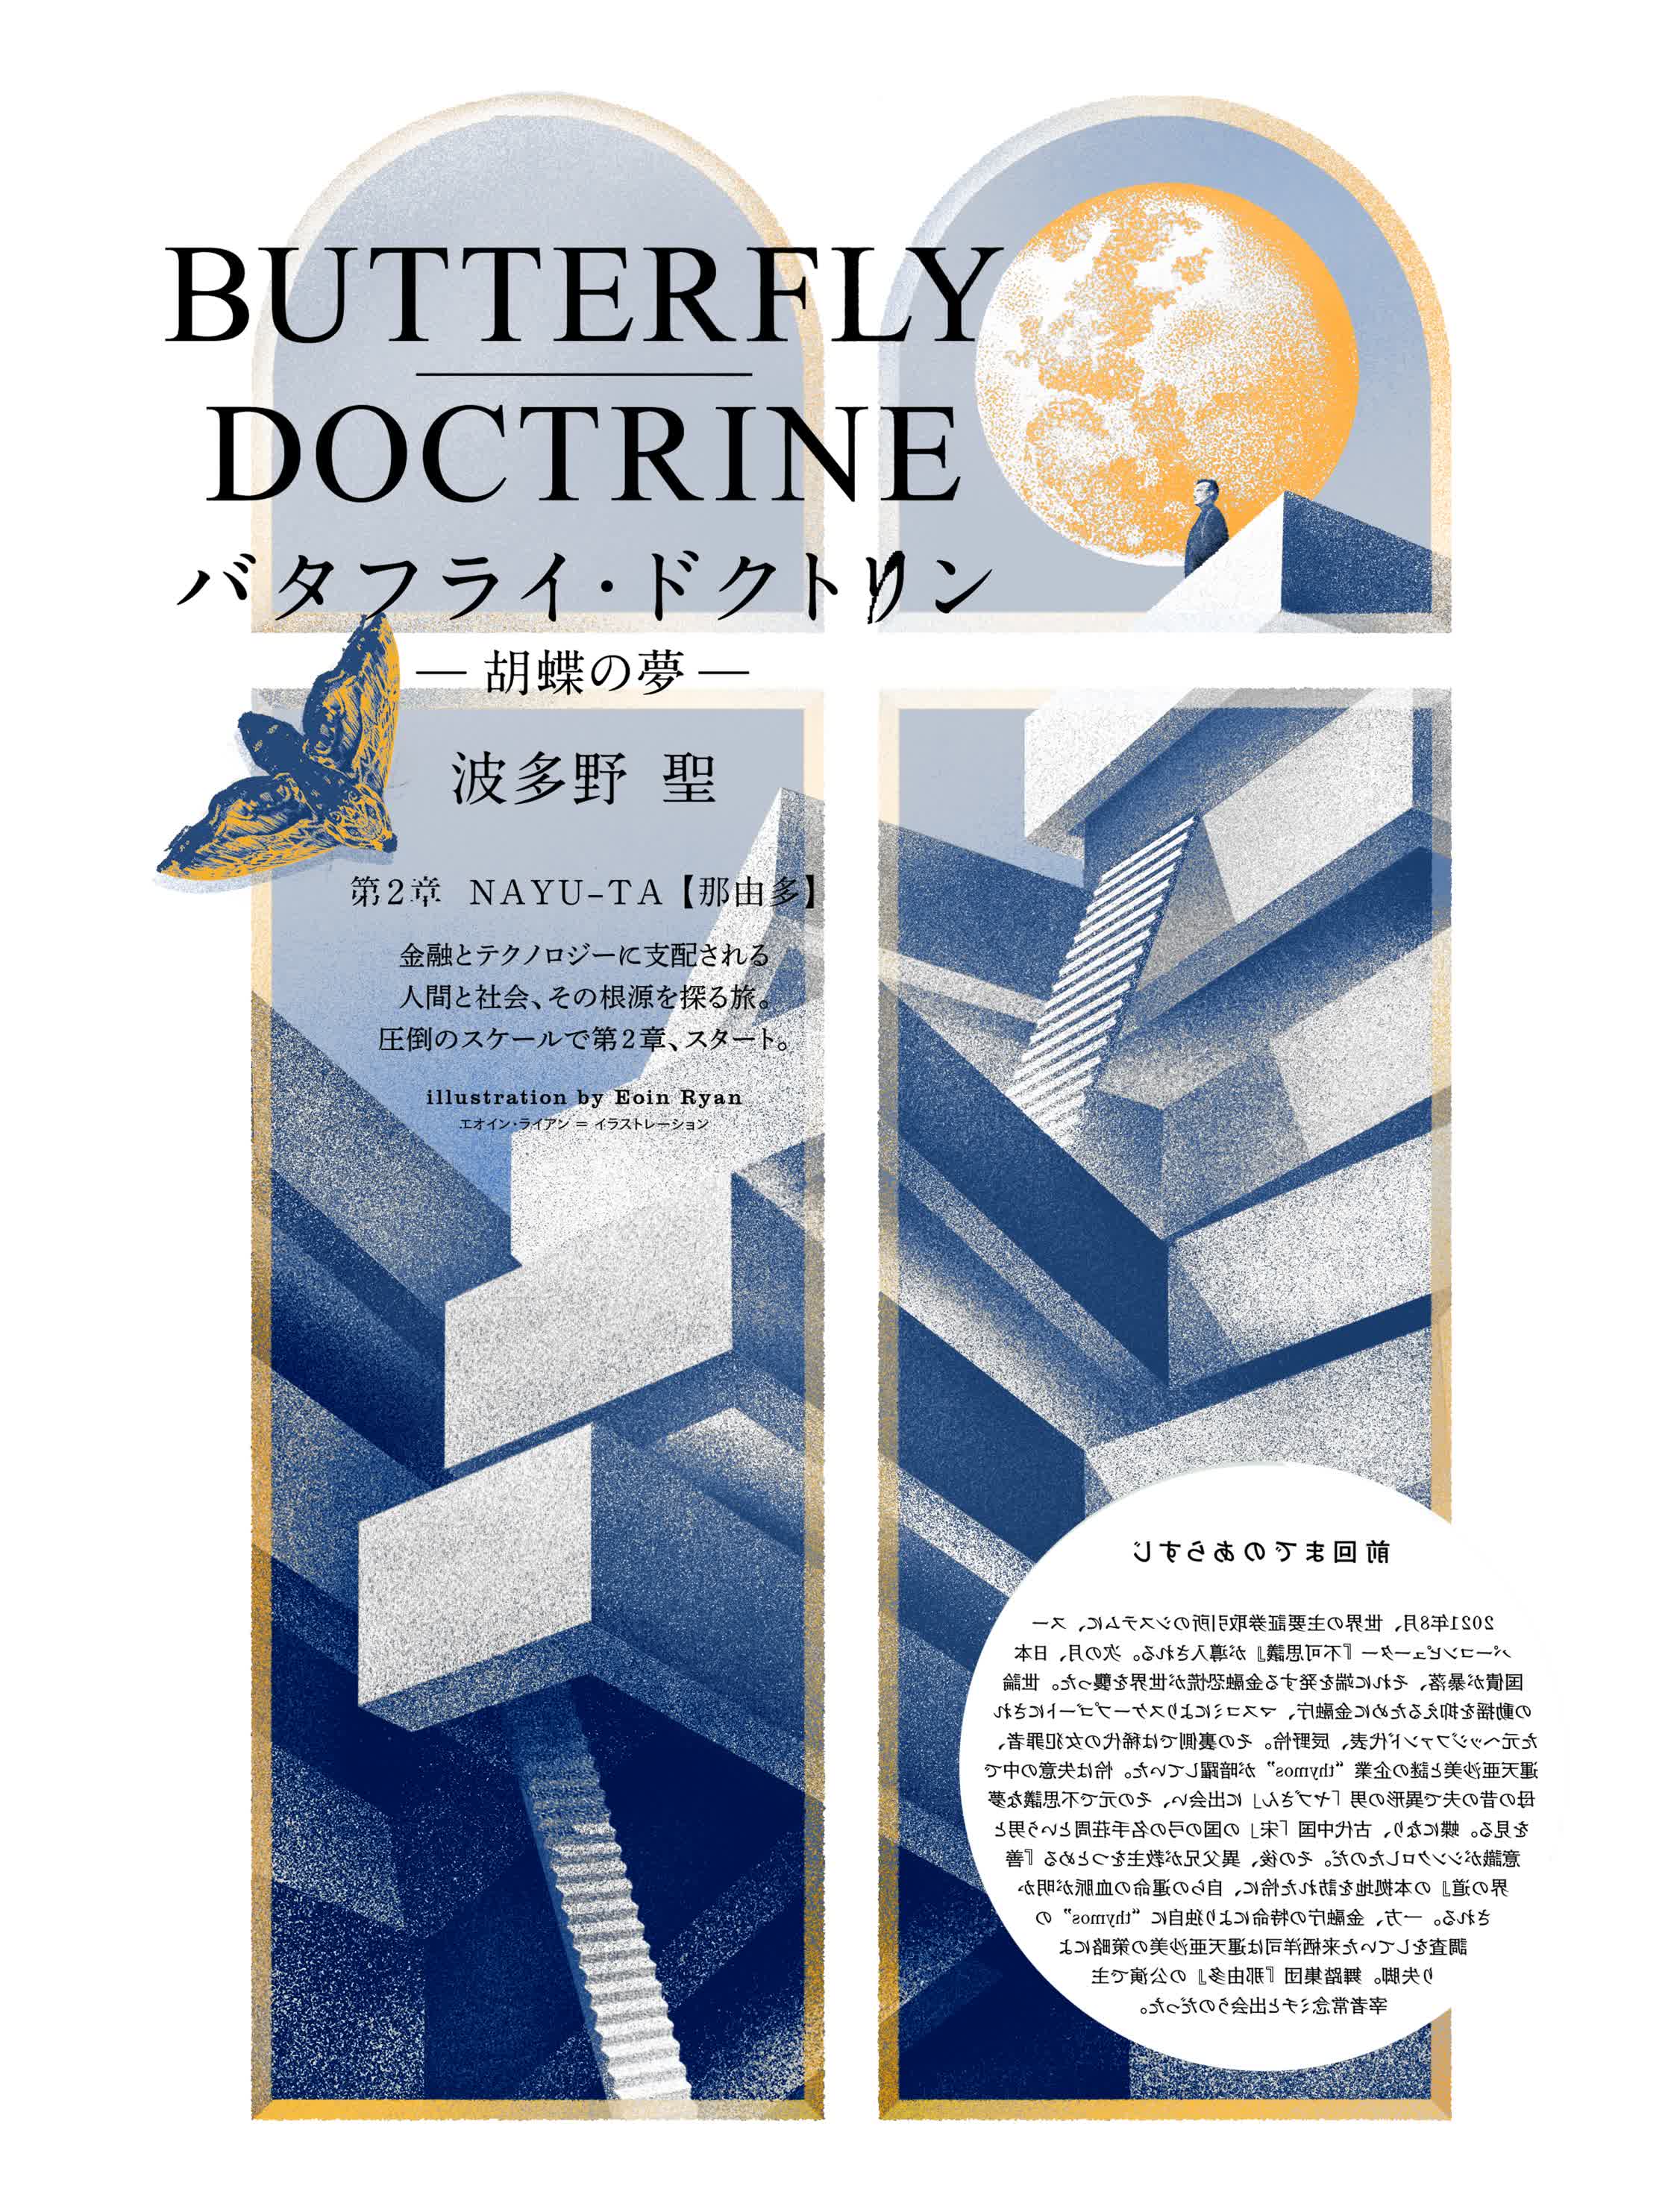 Structures 1 - Butterfly Doctrine.jpg